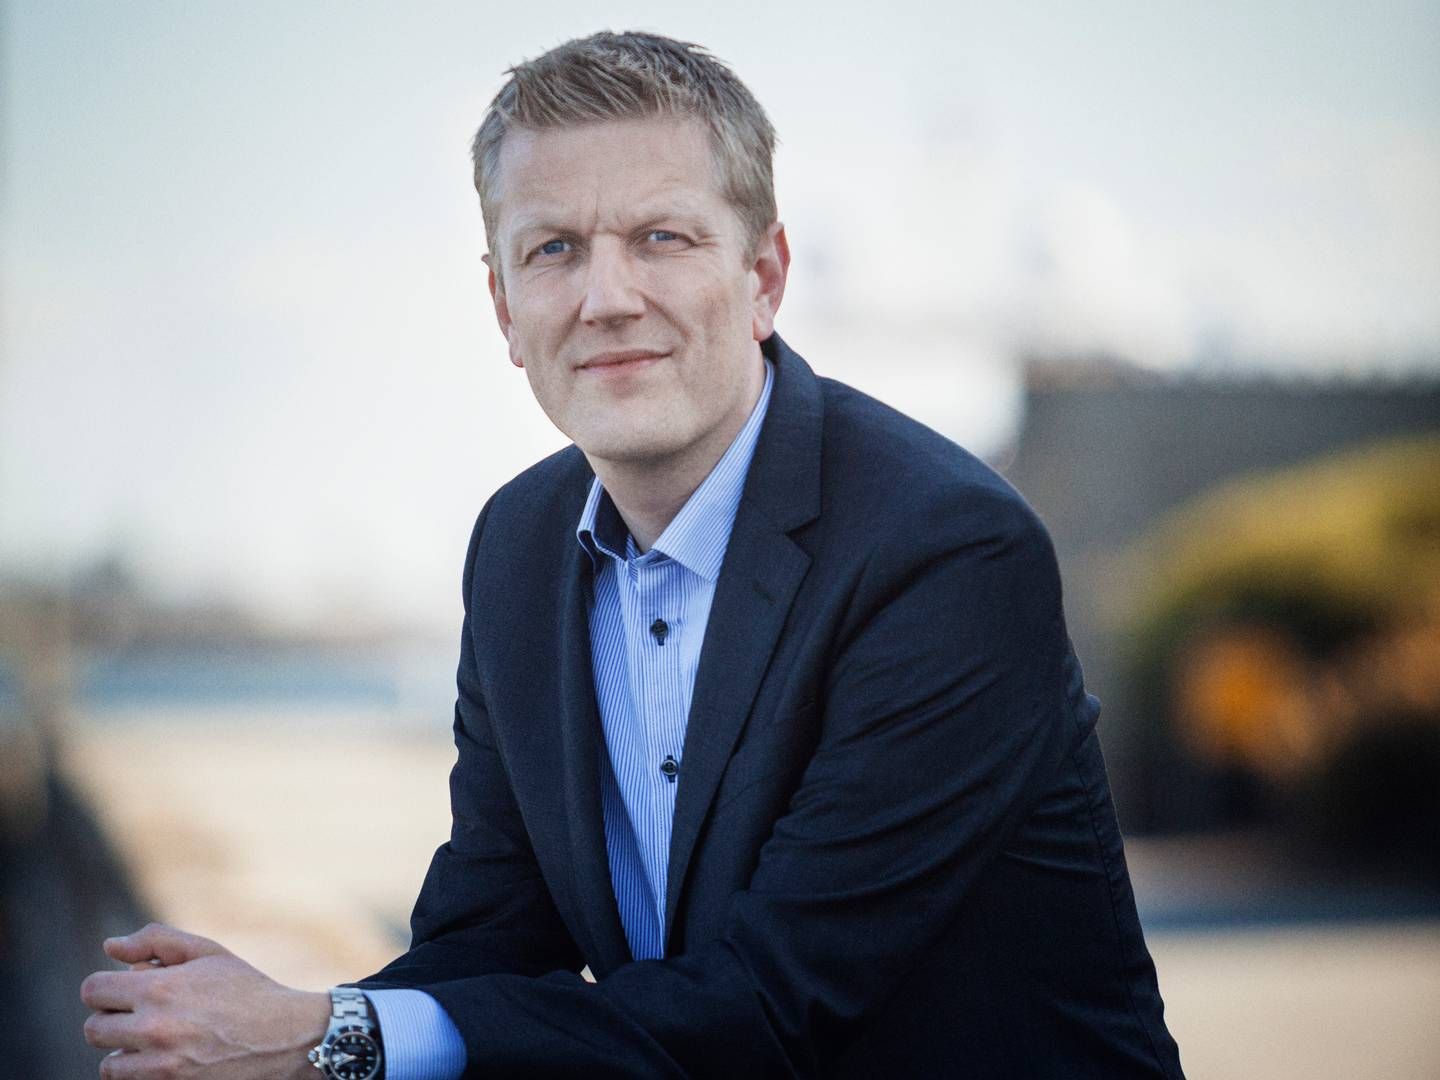 Thomas Mikkelsen is CEO of shipping operator Thorco Projects, which was acquired by Danish group Norden earlier this year. | Photo: Rune Lundø/pr / Thorco Projects